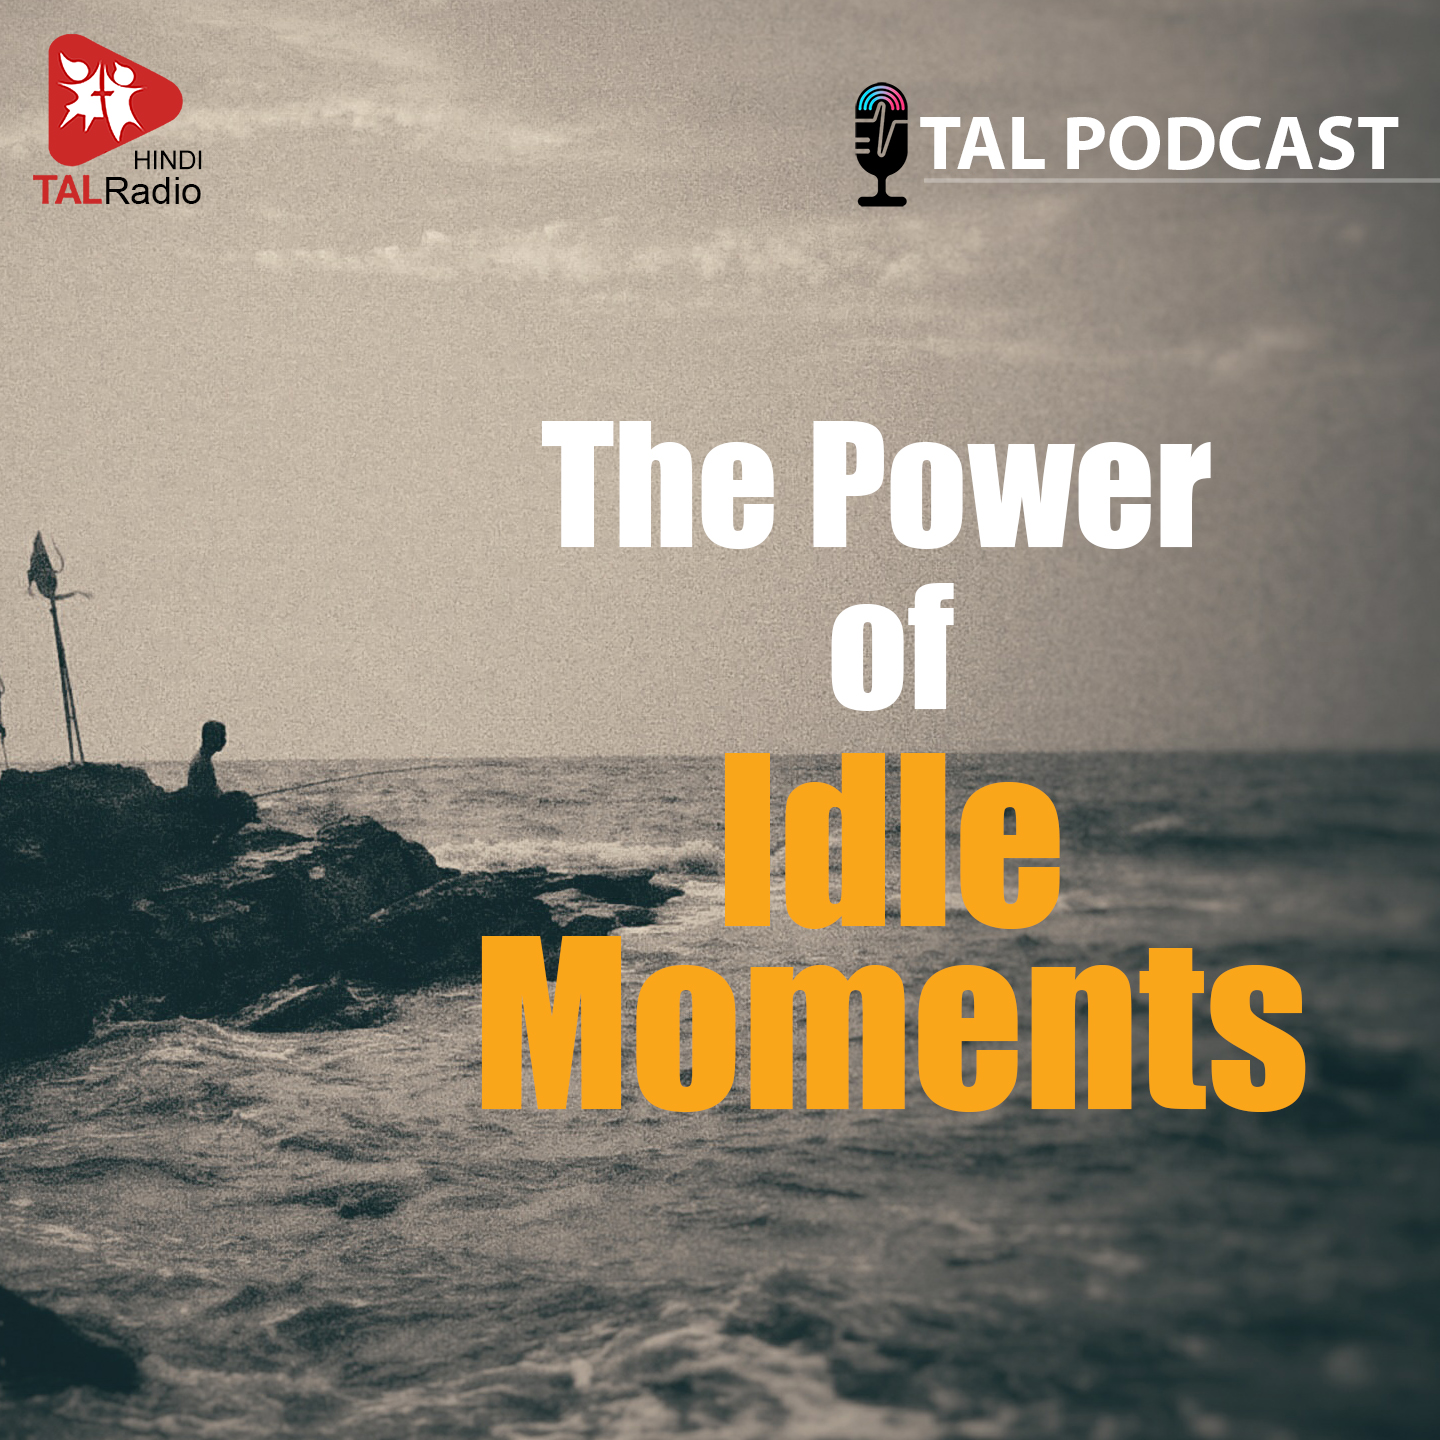 The Power of Idle Moments